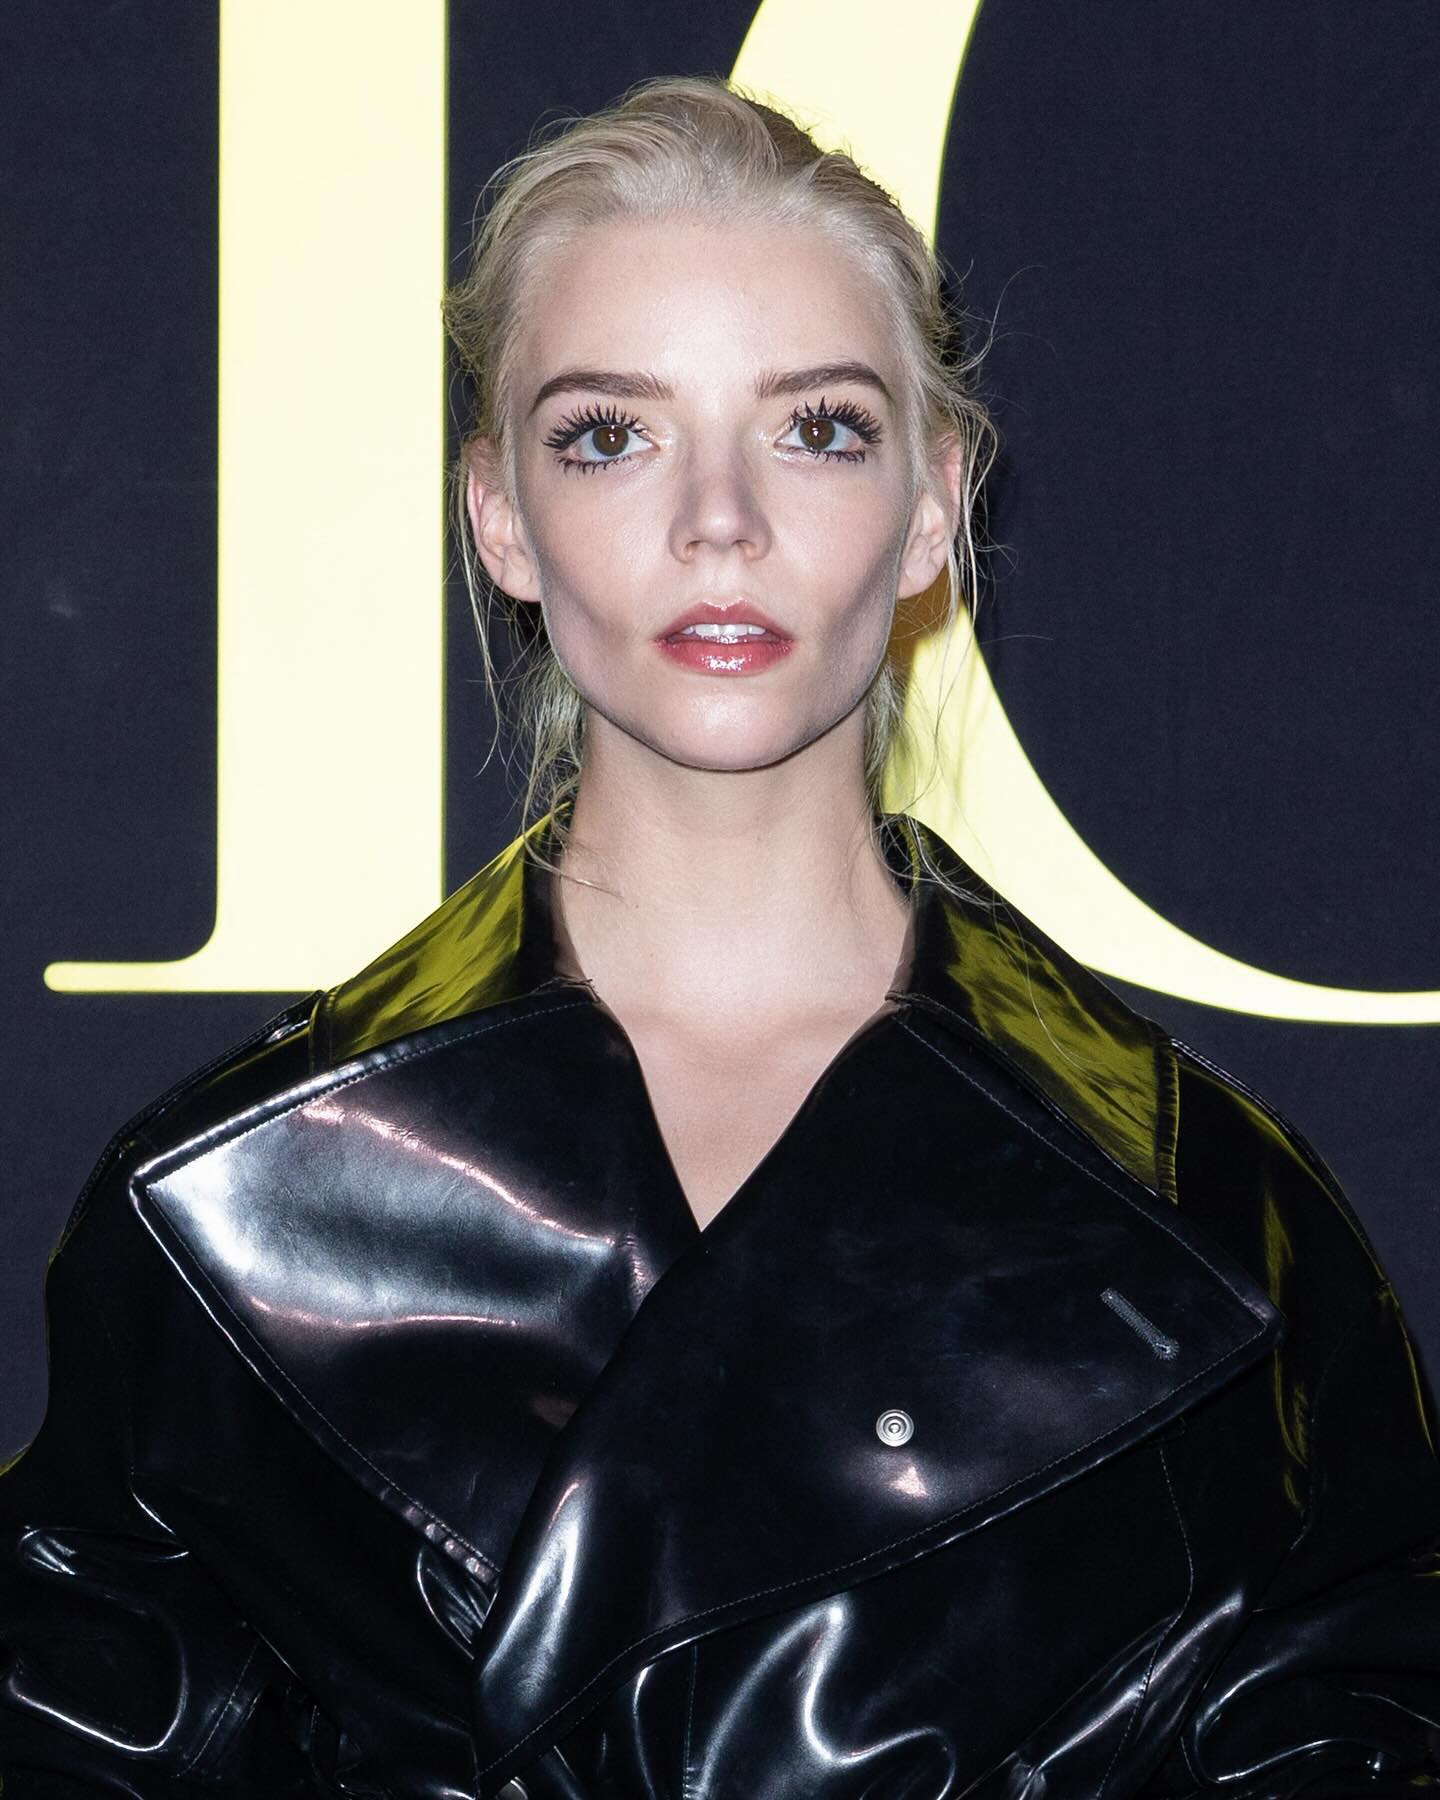 A blonde woman with a black leather jacket and yellow hair. - Anya Taylor-Joy